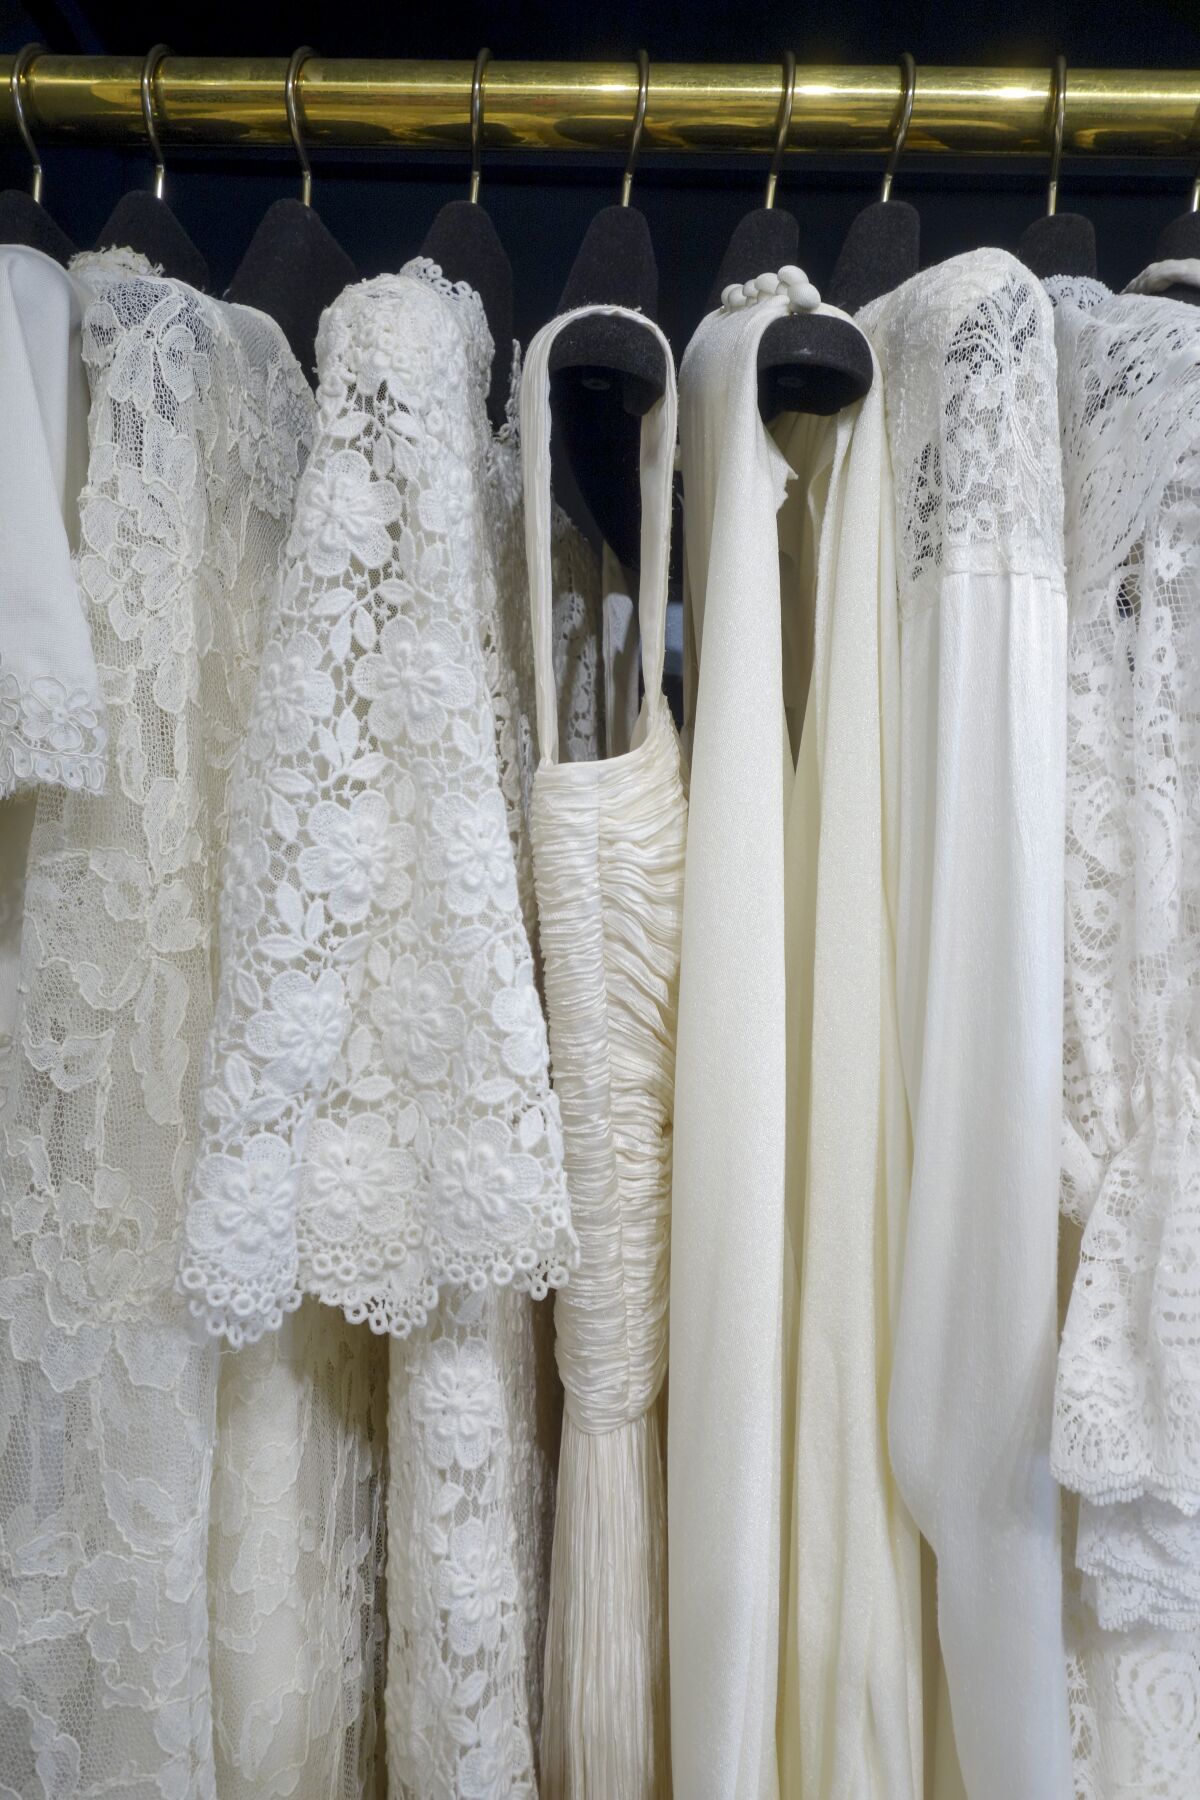 Vintage wedding gowns at Happy Isles in Los Angeles.